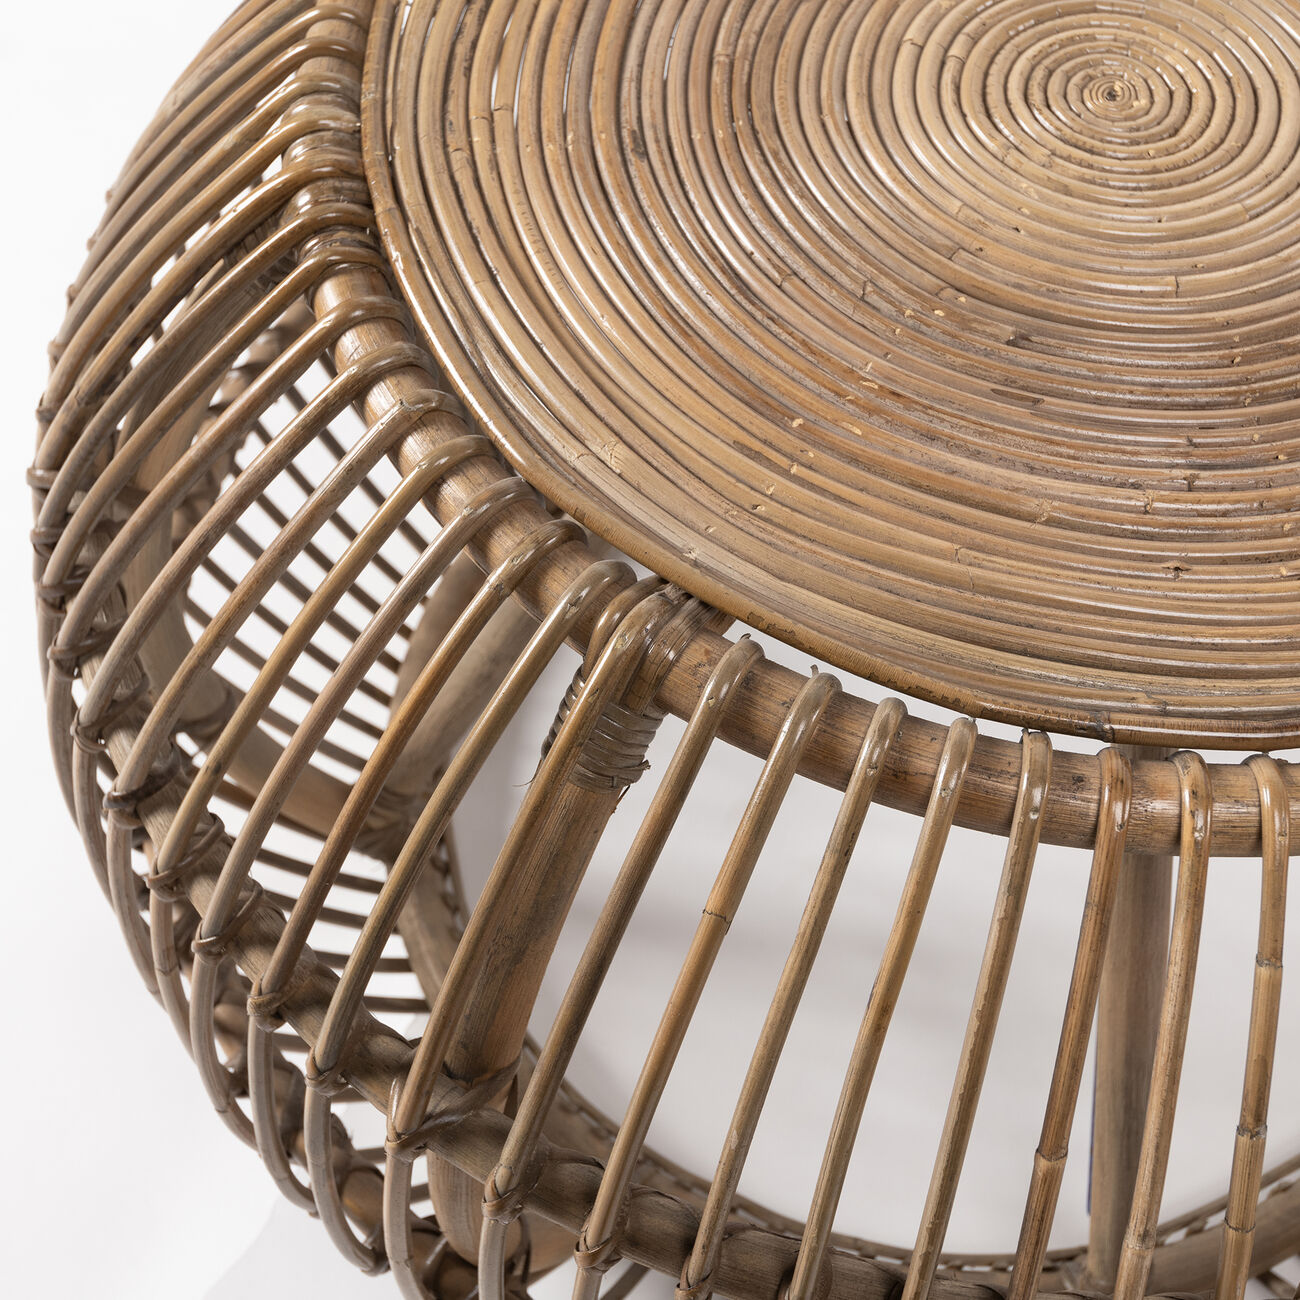 Handwoven Round Rattan Coffee Table with Concentric Circle Top, Brown